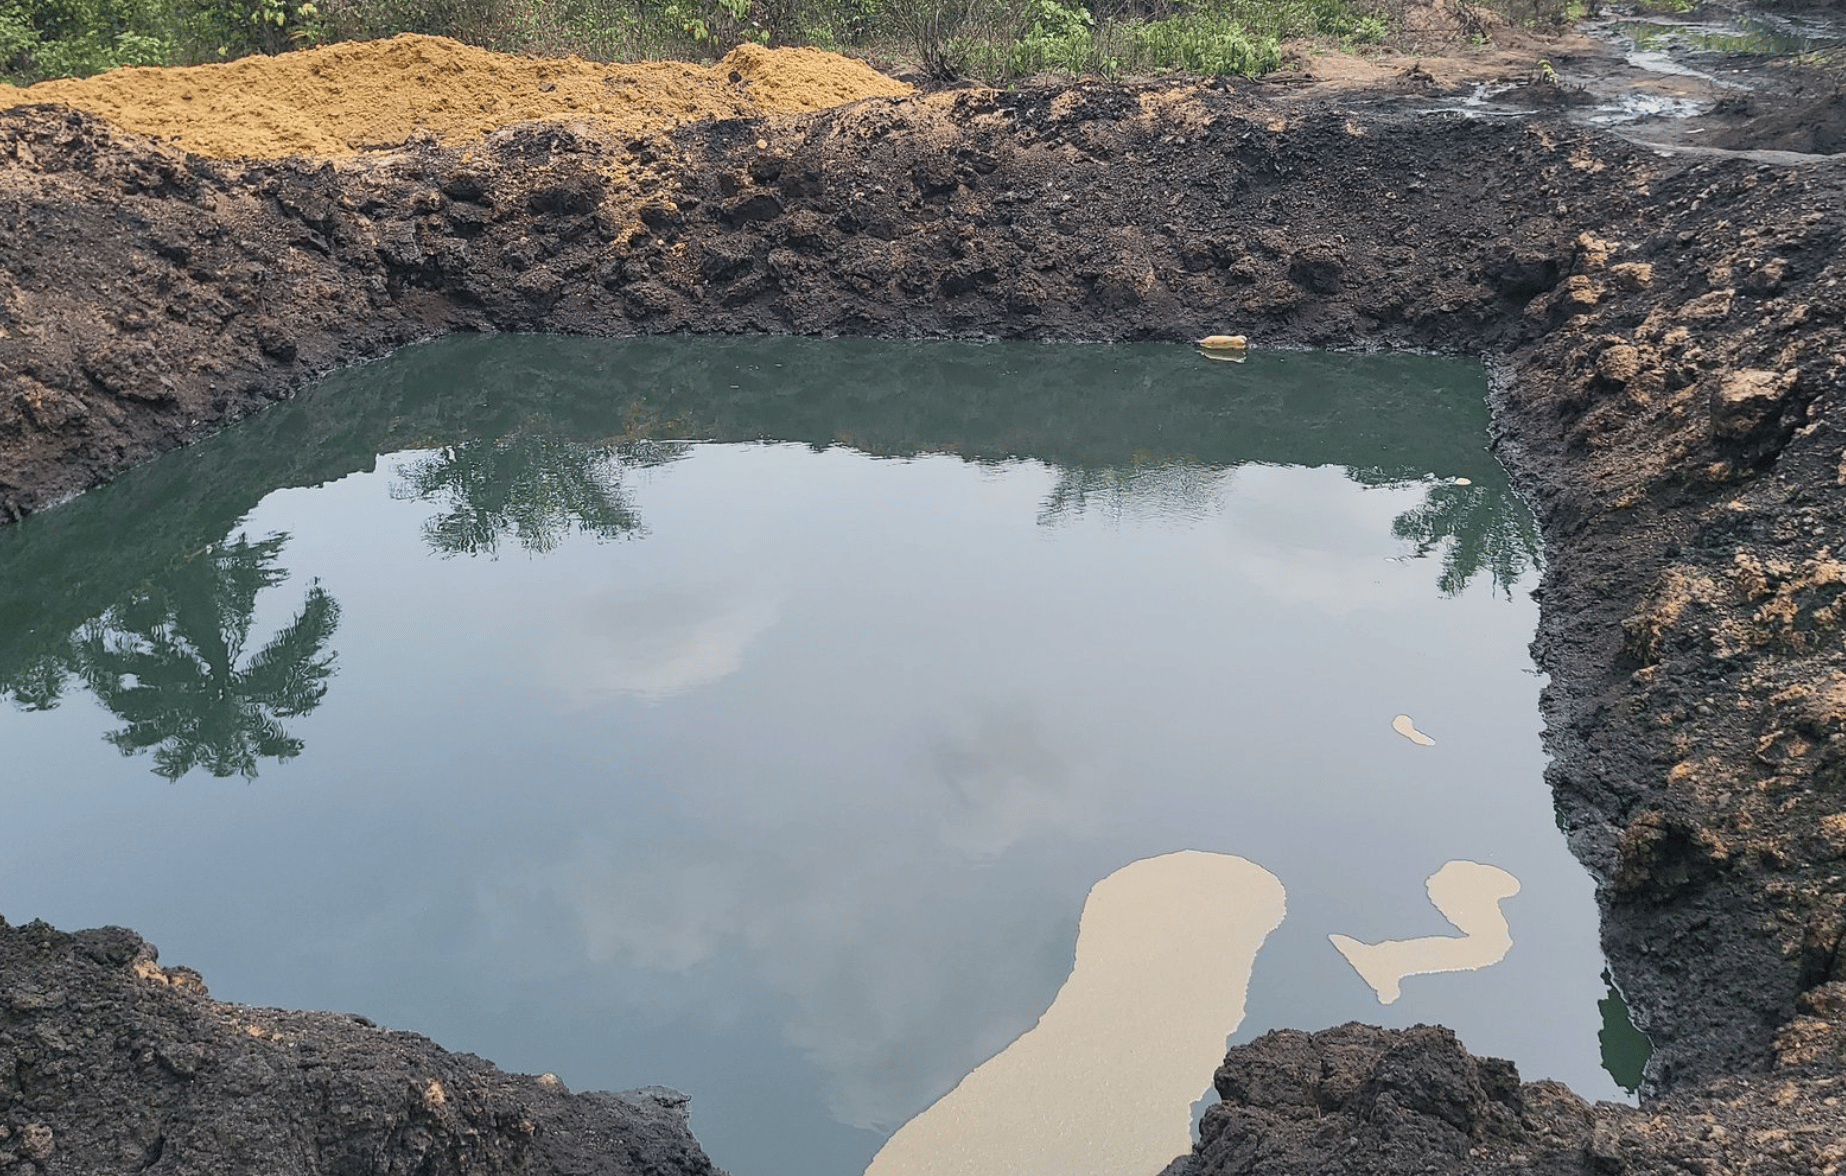 Sabotage Has Reduced Trans Niger Crude Oil Pipeline to Less than 5% Output in Ibaa Community of Emeoha Local Government of Rives State, Nigeria - 23 March 2022